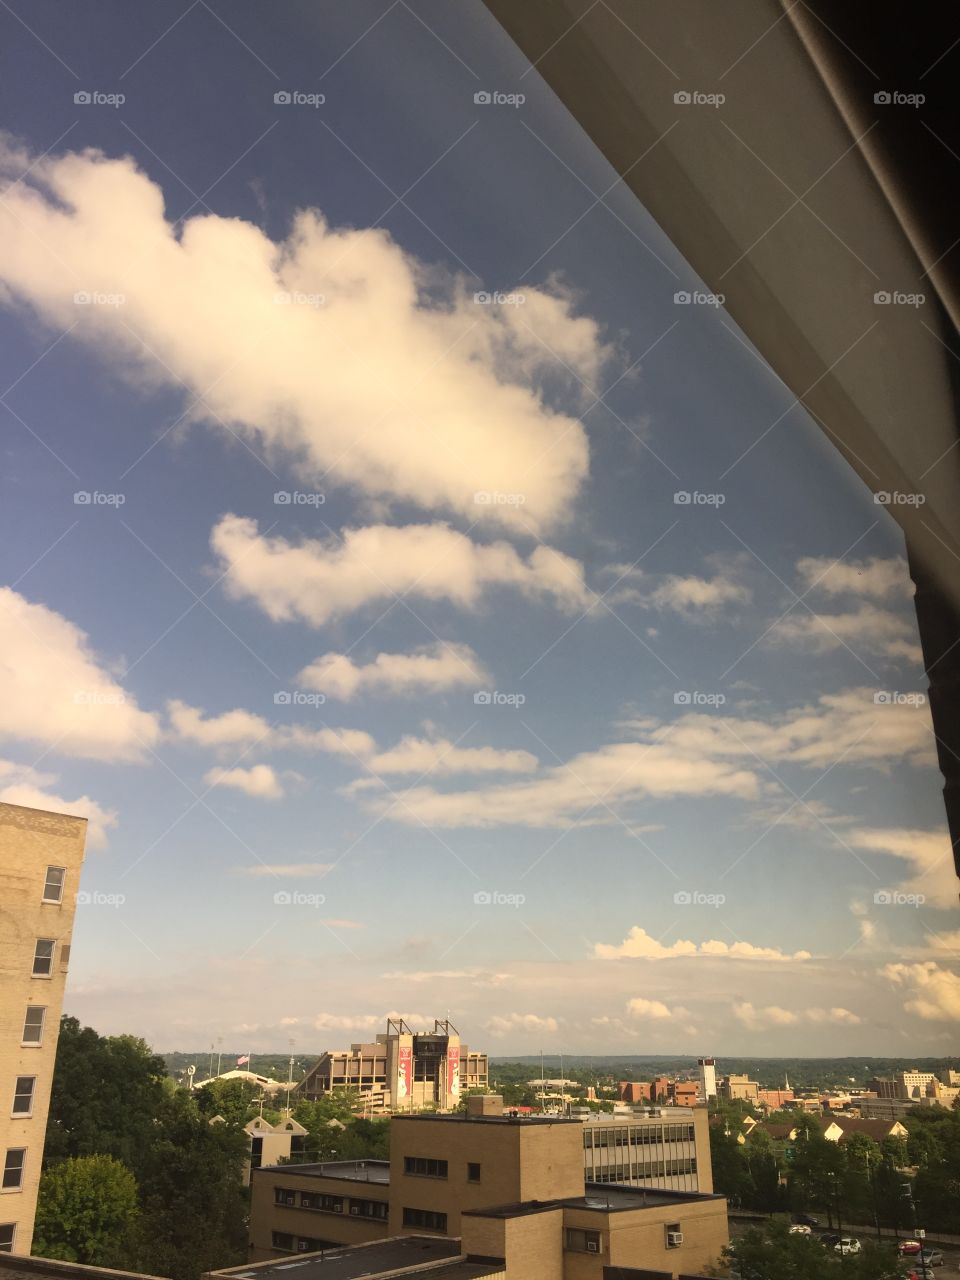 My view from a hospital window of downtown Youngstown, Ohio 